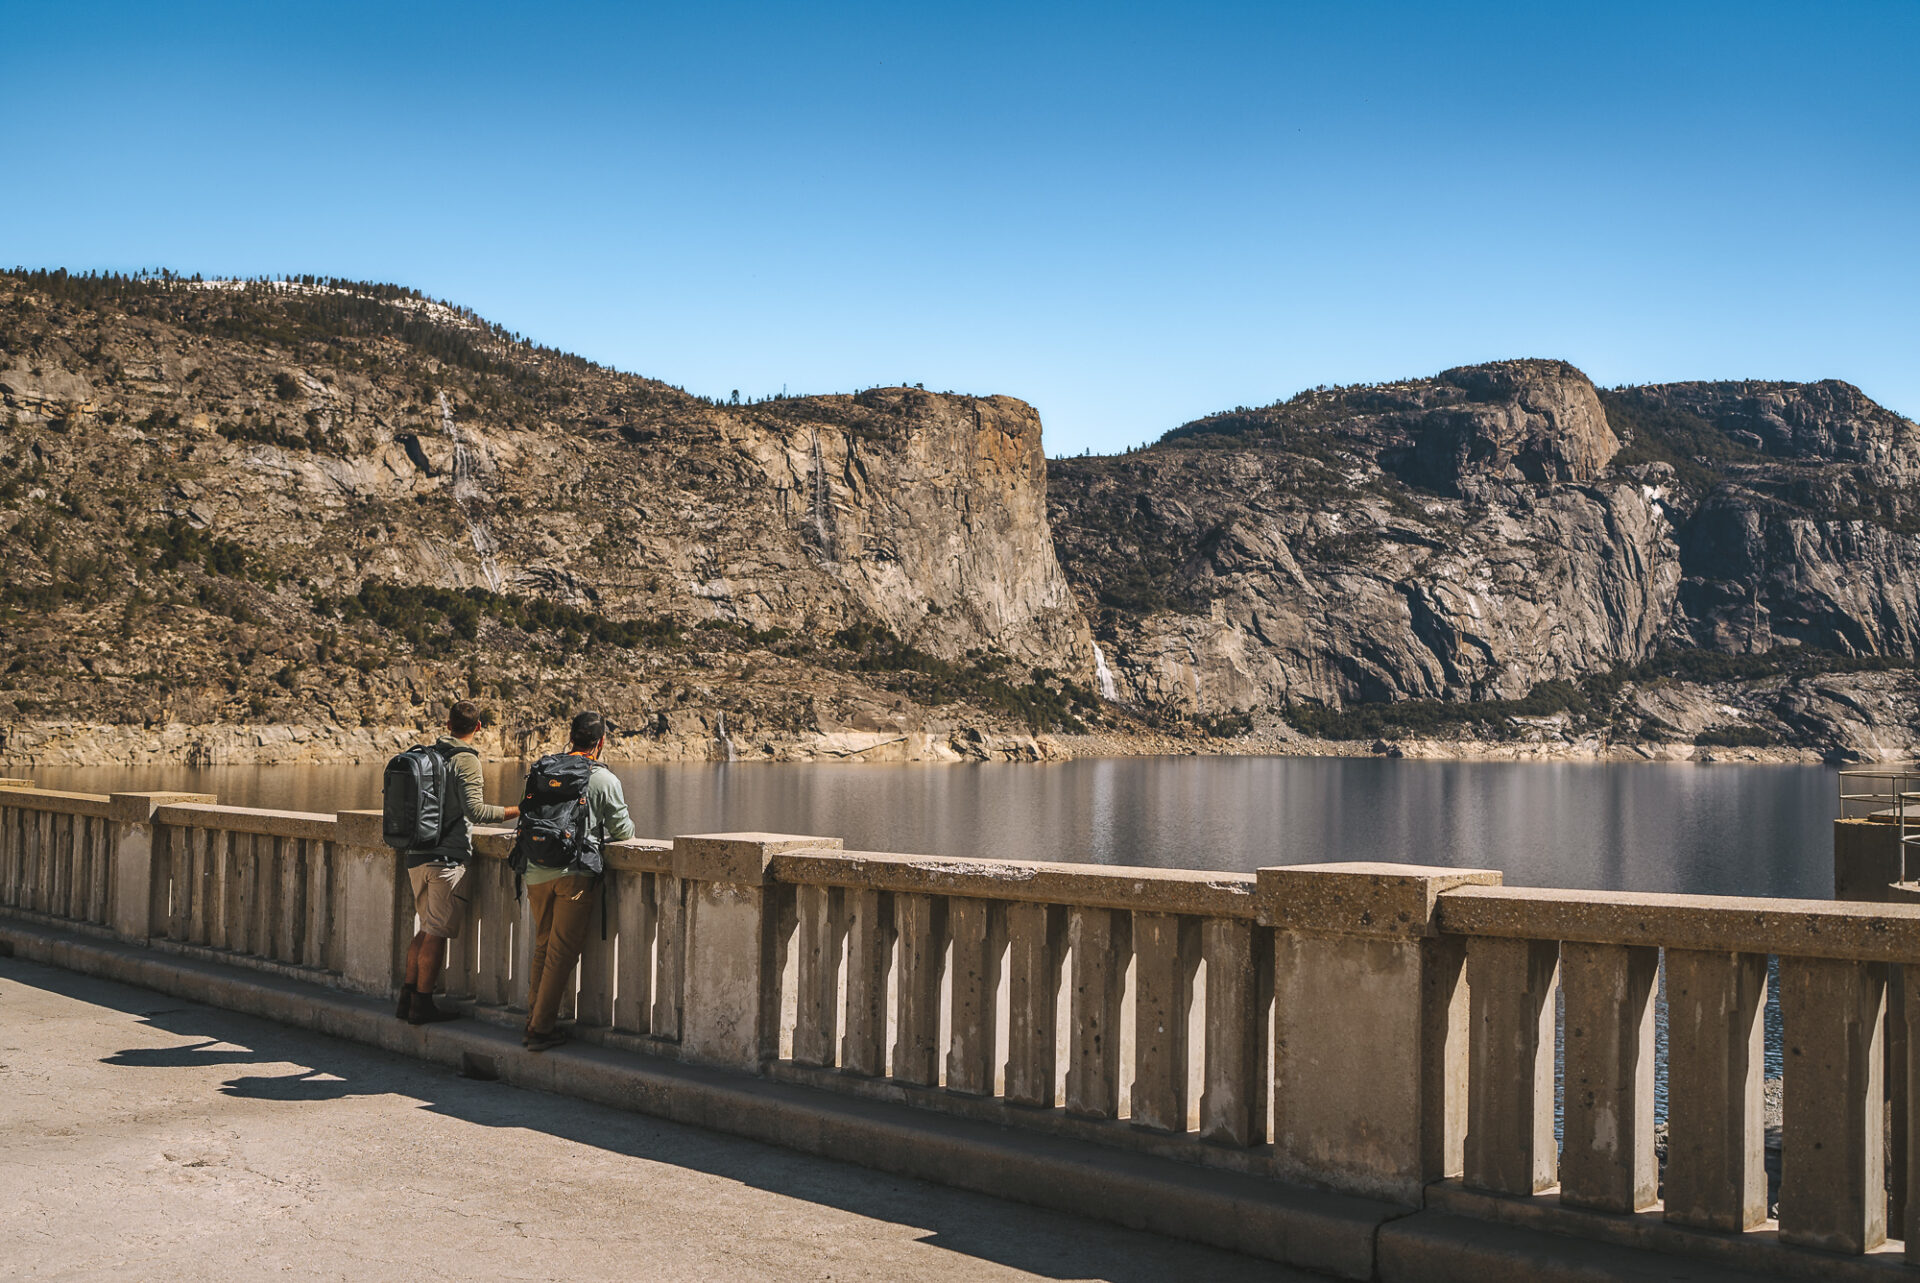 Overlooking Hetch Hetchy Reservoir on the O'Shaughnessy Dam